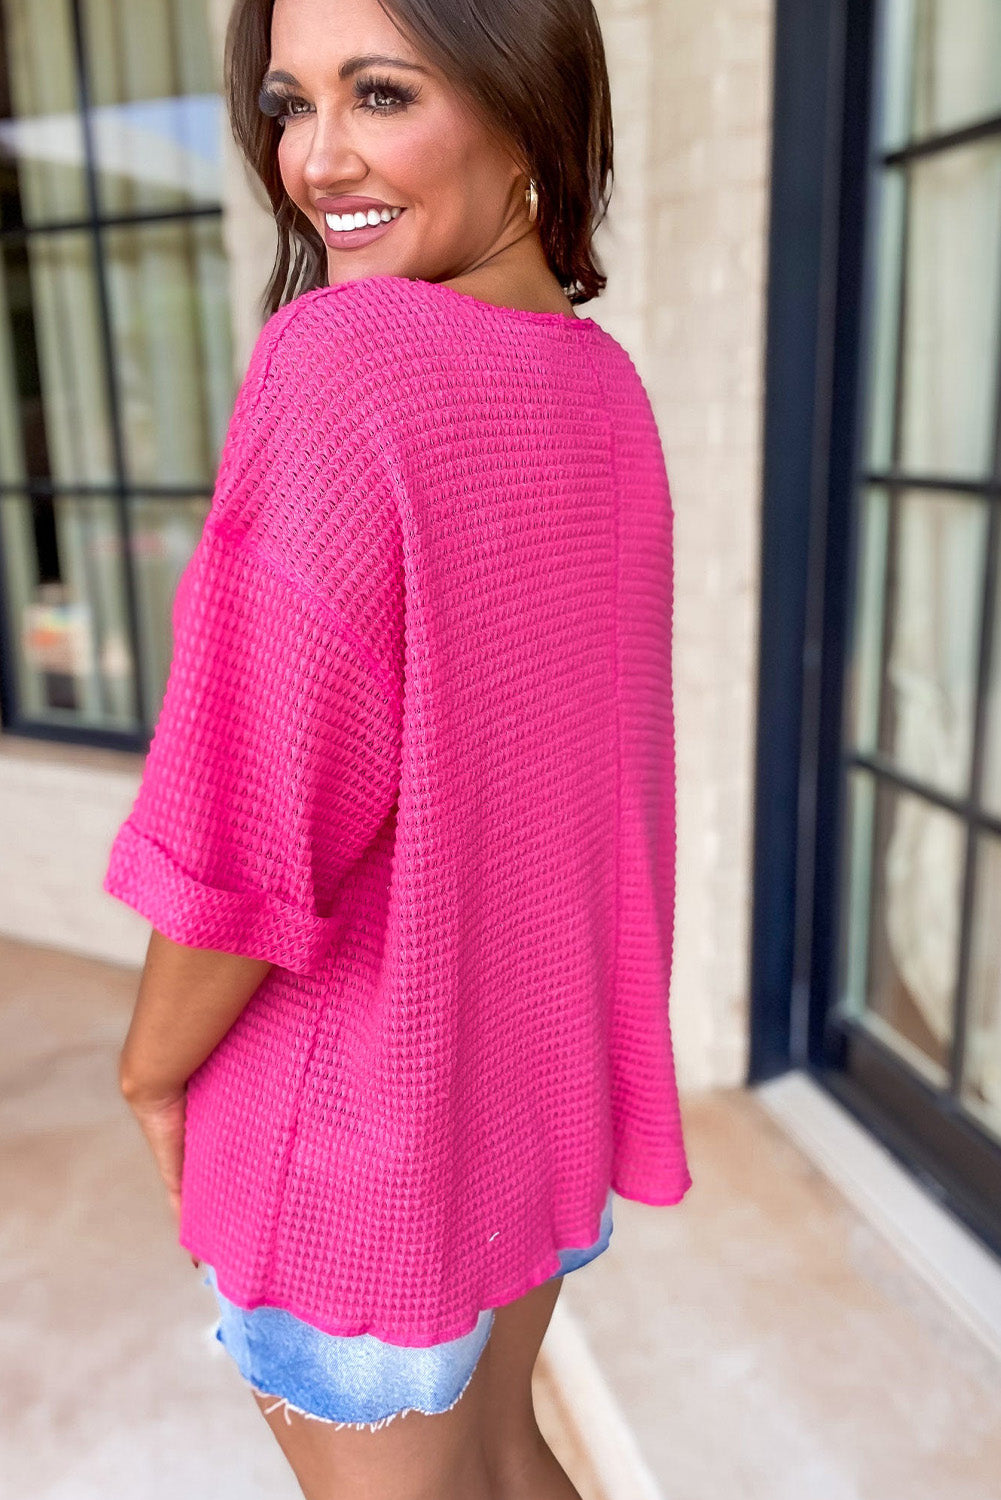 Bright Pink Plus Size Waffle Knit Cuffed Short Sleeve Top Pre Order Plus Size JT's Designer Fashion